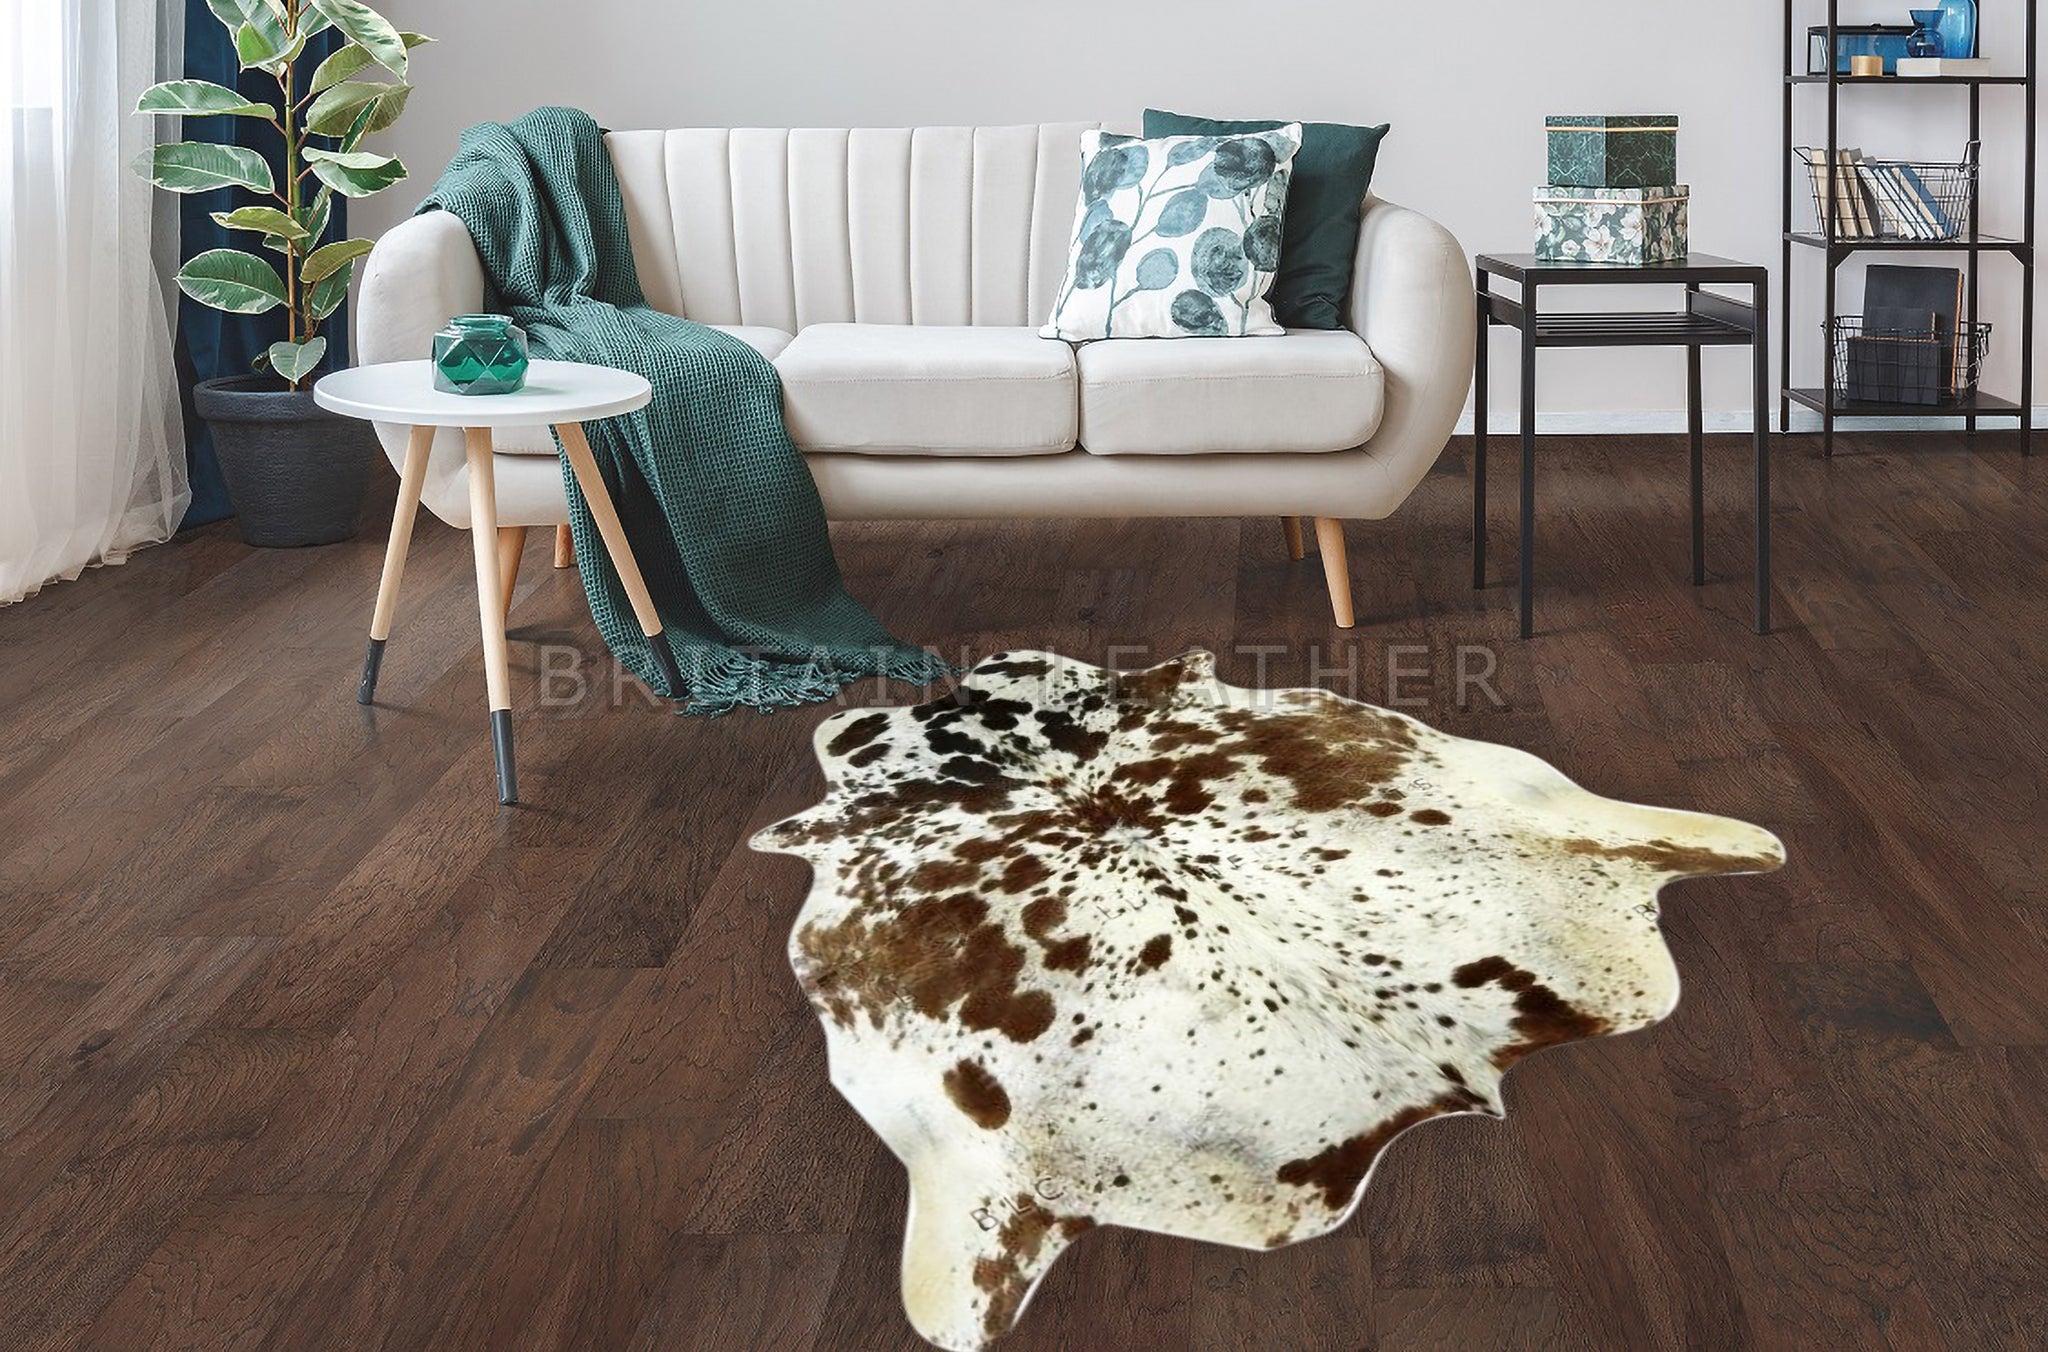 Natural Cowhide Area Rug - Real Hair on Cow hide Leather Rug - Soft Smooth Cow Skin Fur Rug ( 62" X 66" ) - SAME AS PIC